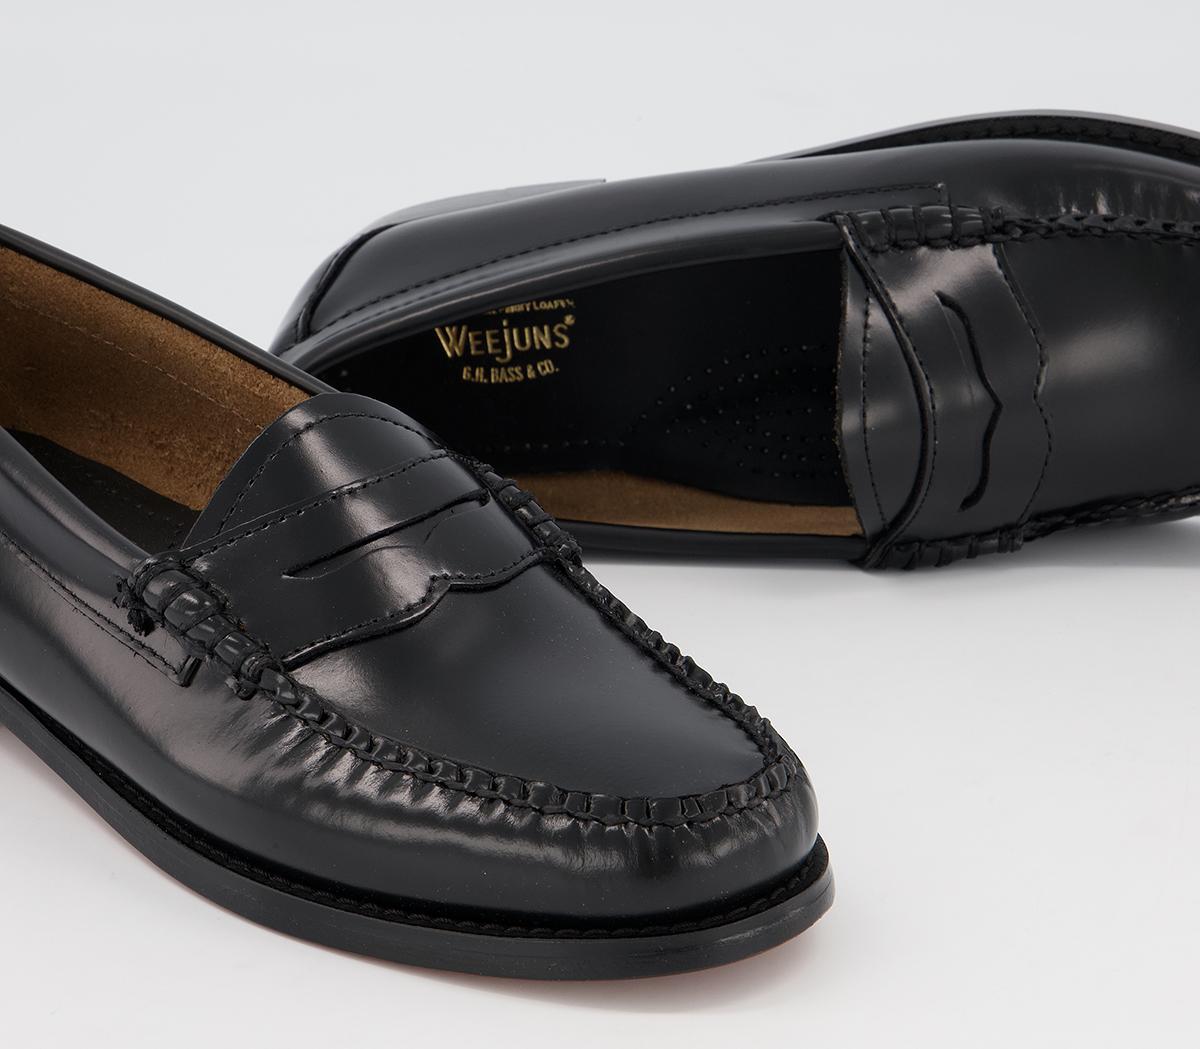 G.H Bass & Co Weejuns Penny Loafers Black Leather - Flat Shoes for Women